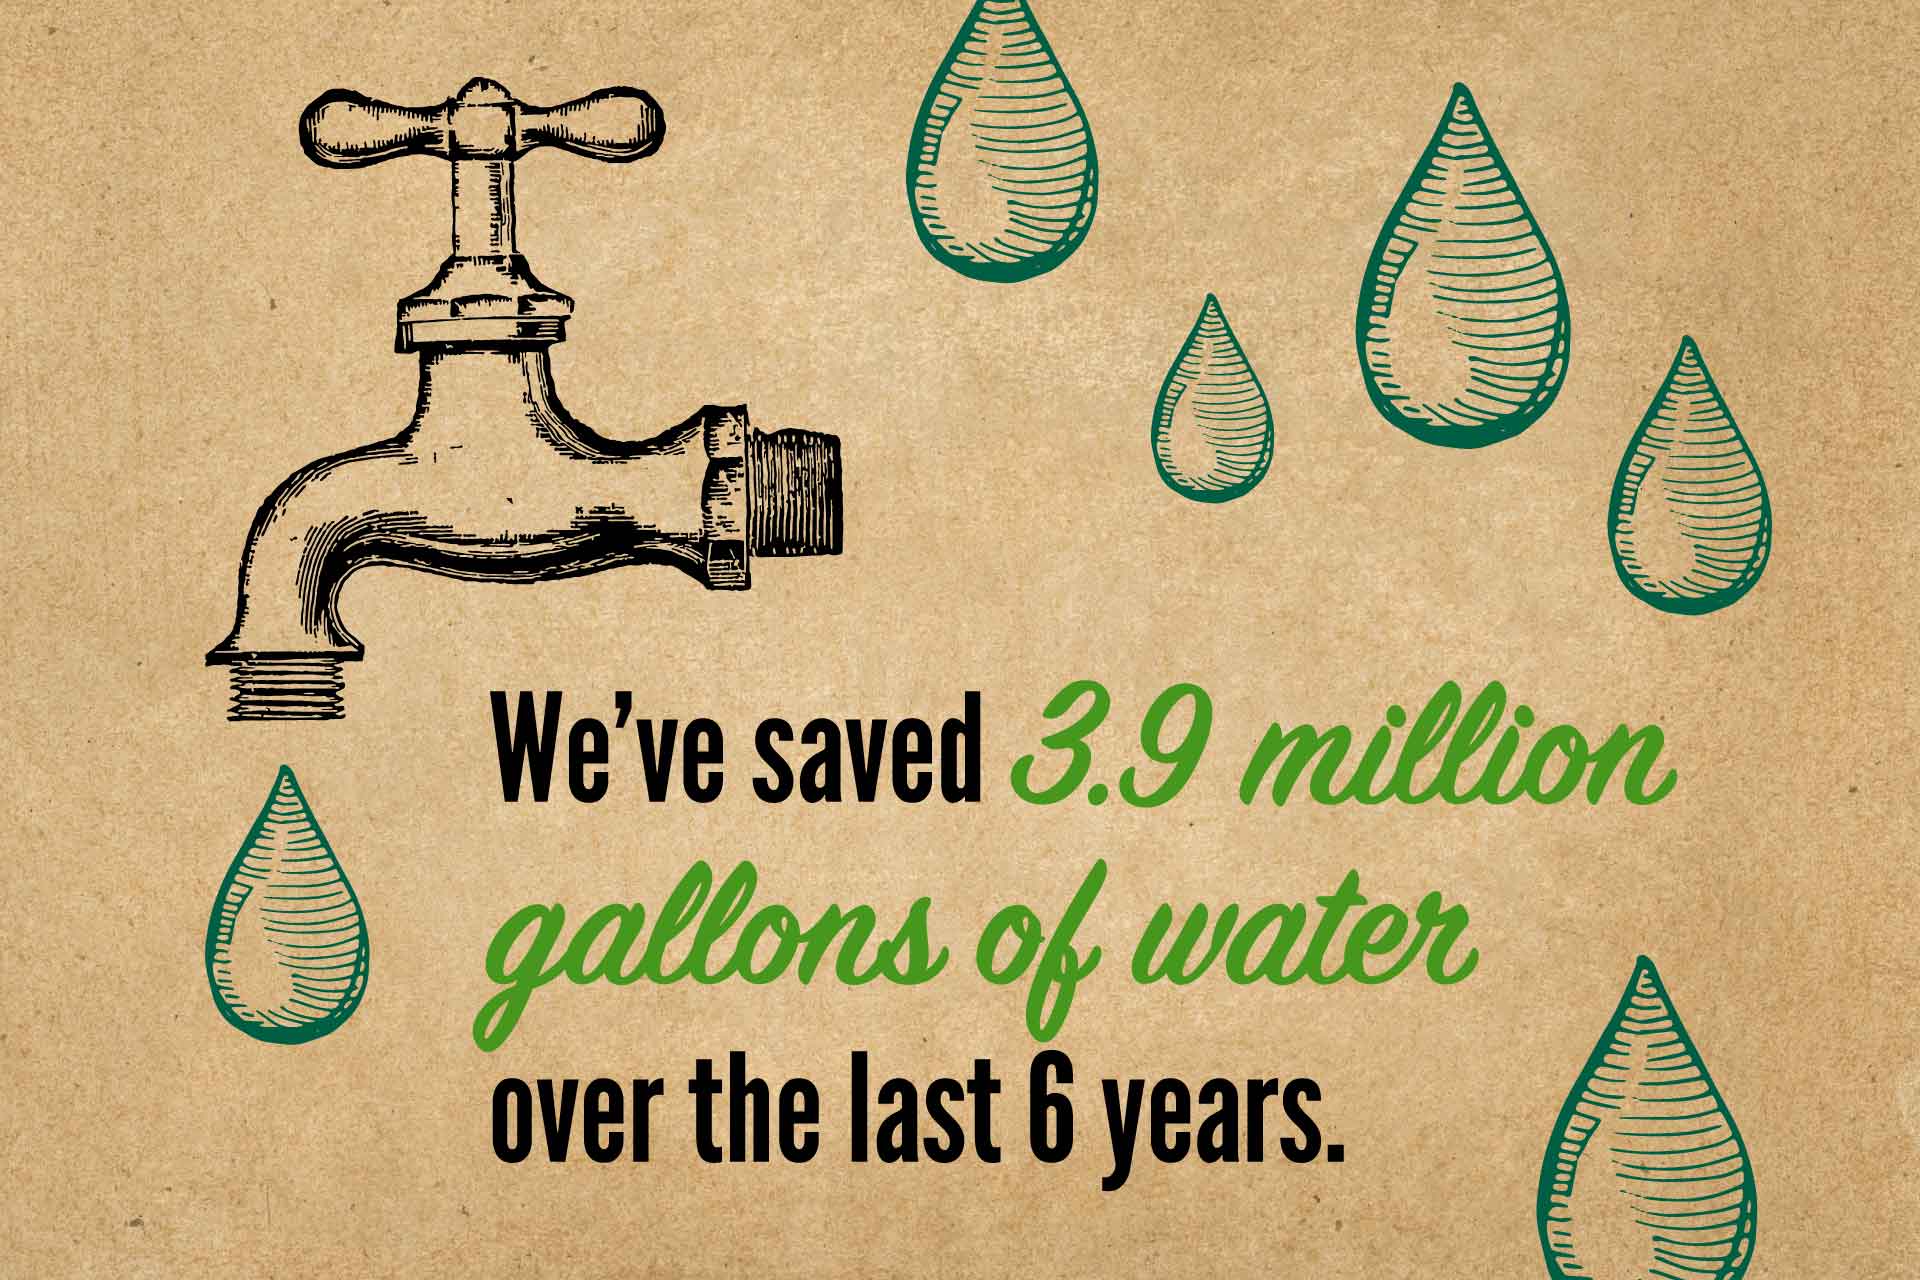 Water faucet graphic: We’ve saved 3.9 million gallons of water over the last 6 years.